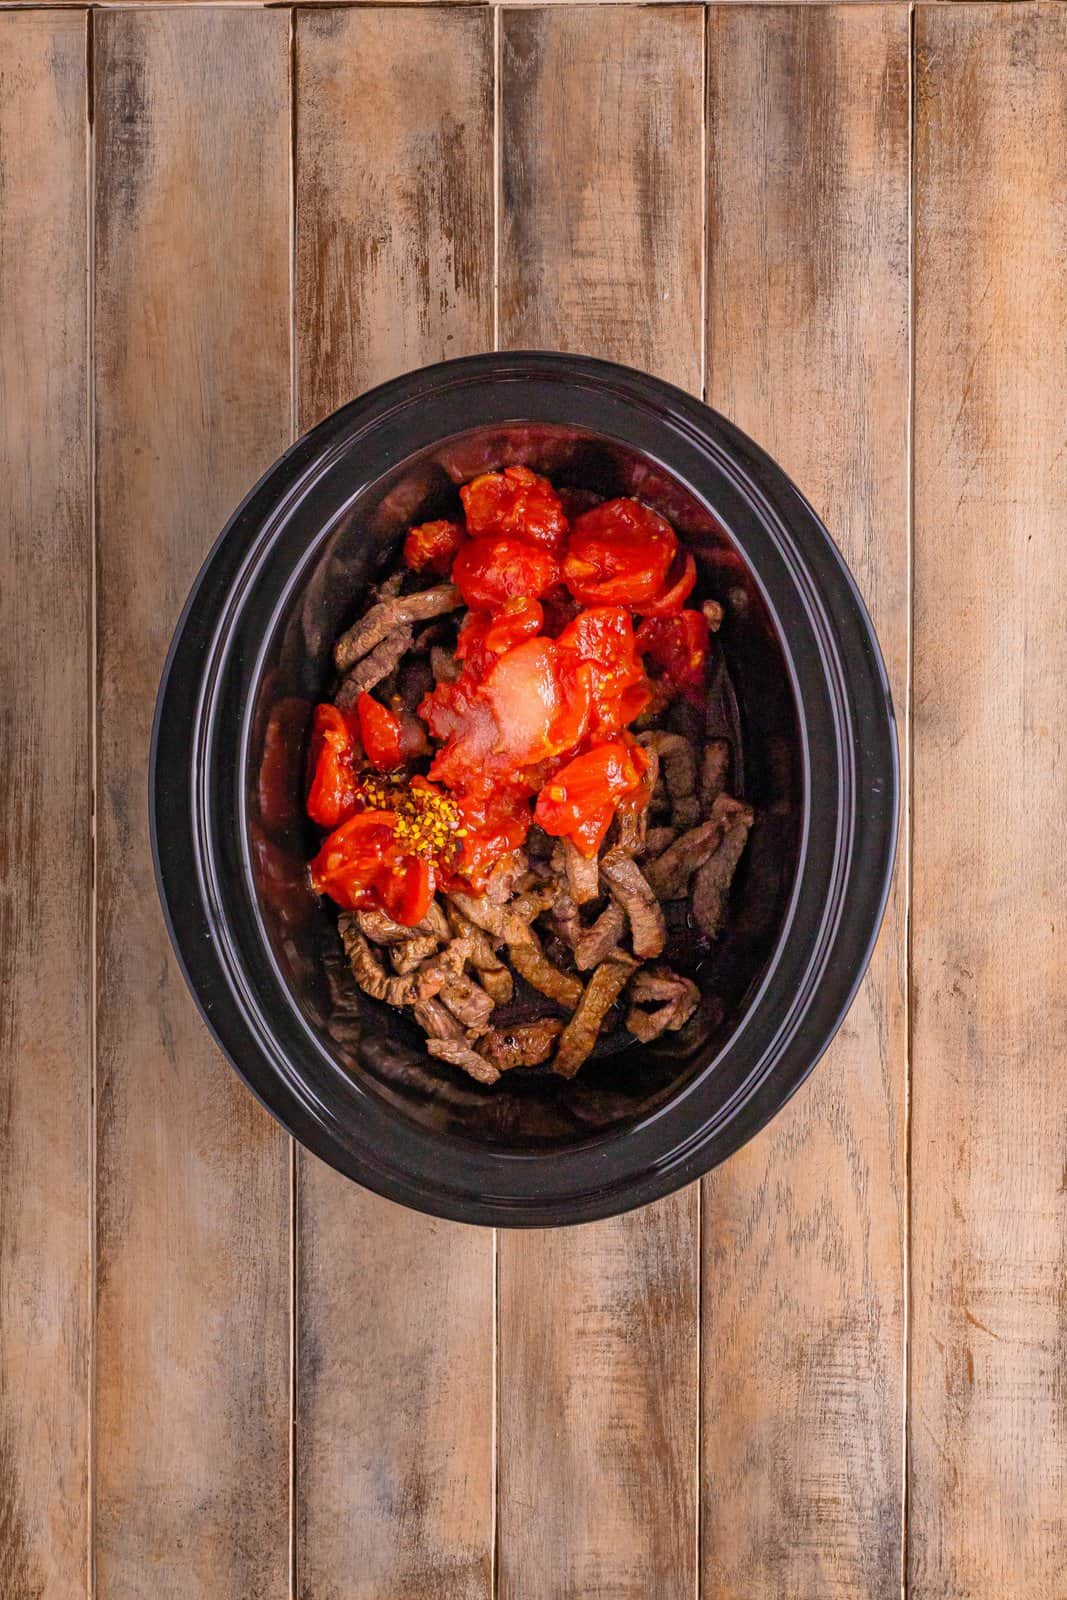 stewed tomatoes and red pepper flakes added on top of the pepper steak in the black oval slow cooker. 